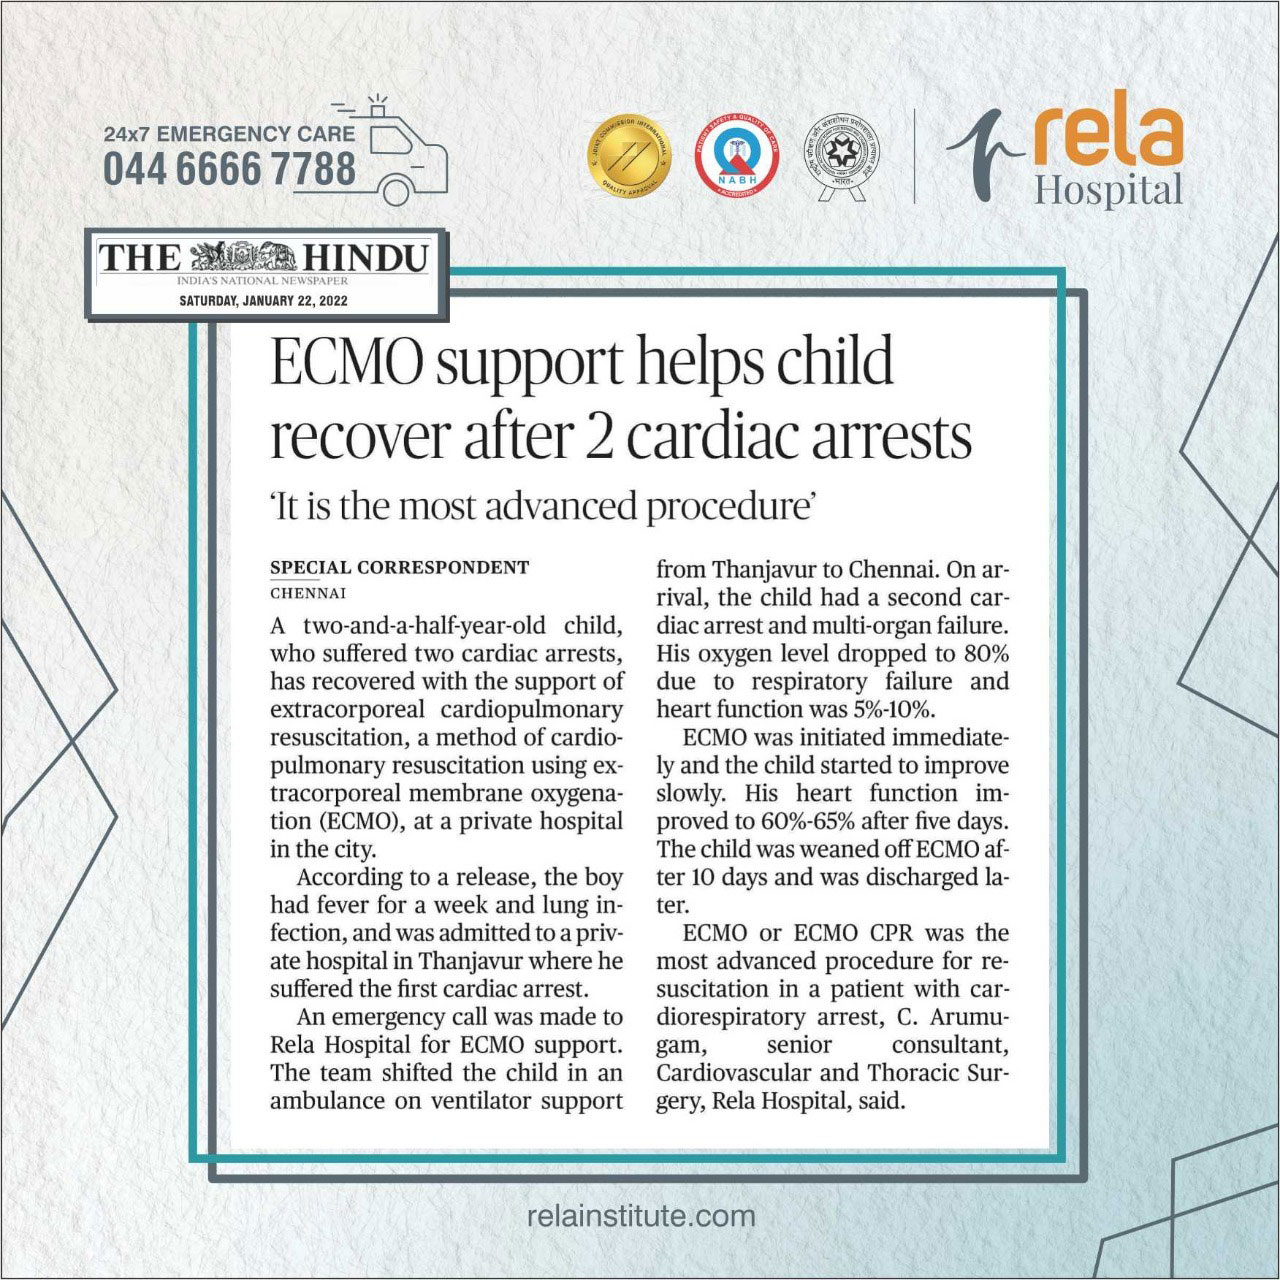 Rela Hospital Saves The Life Of A Two-And-A-Half-Year-Old Child By Successfully Performing A Rare ECMO CPR Procedure